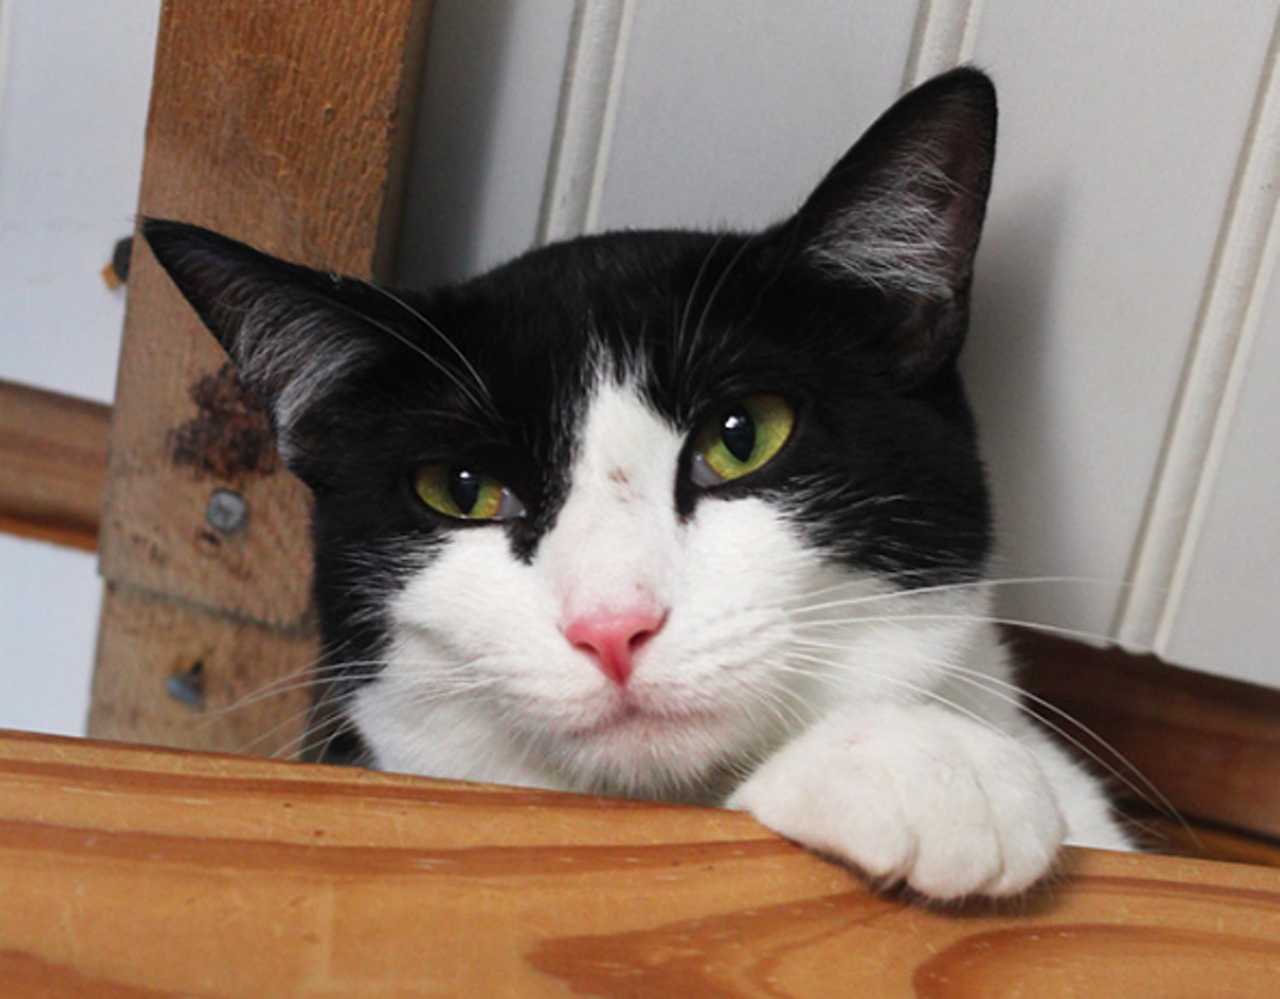 Nola
"Hello, I’m pretty girl who is also a little timid and overwhelmed right now. I’m new to the Cattery so I still trying to get my bearings and become more confident. If you think that you can help me out with that please stop by and visit me today!"